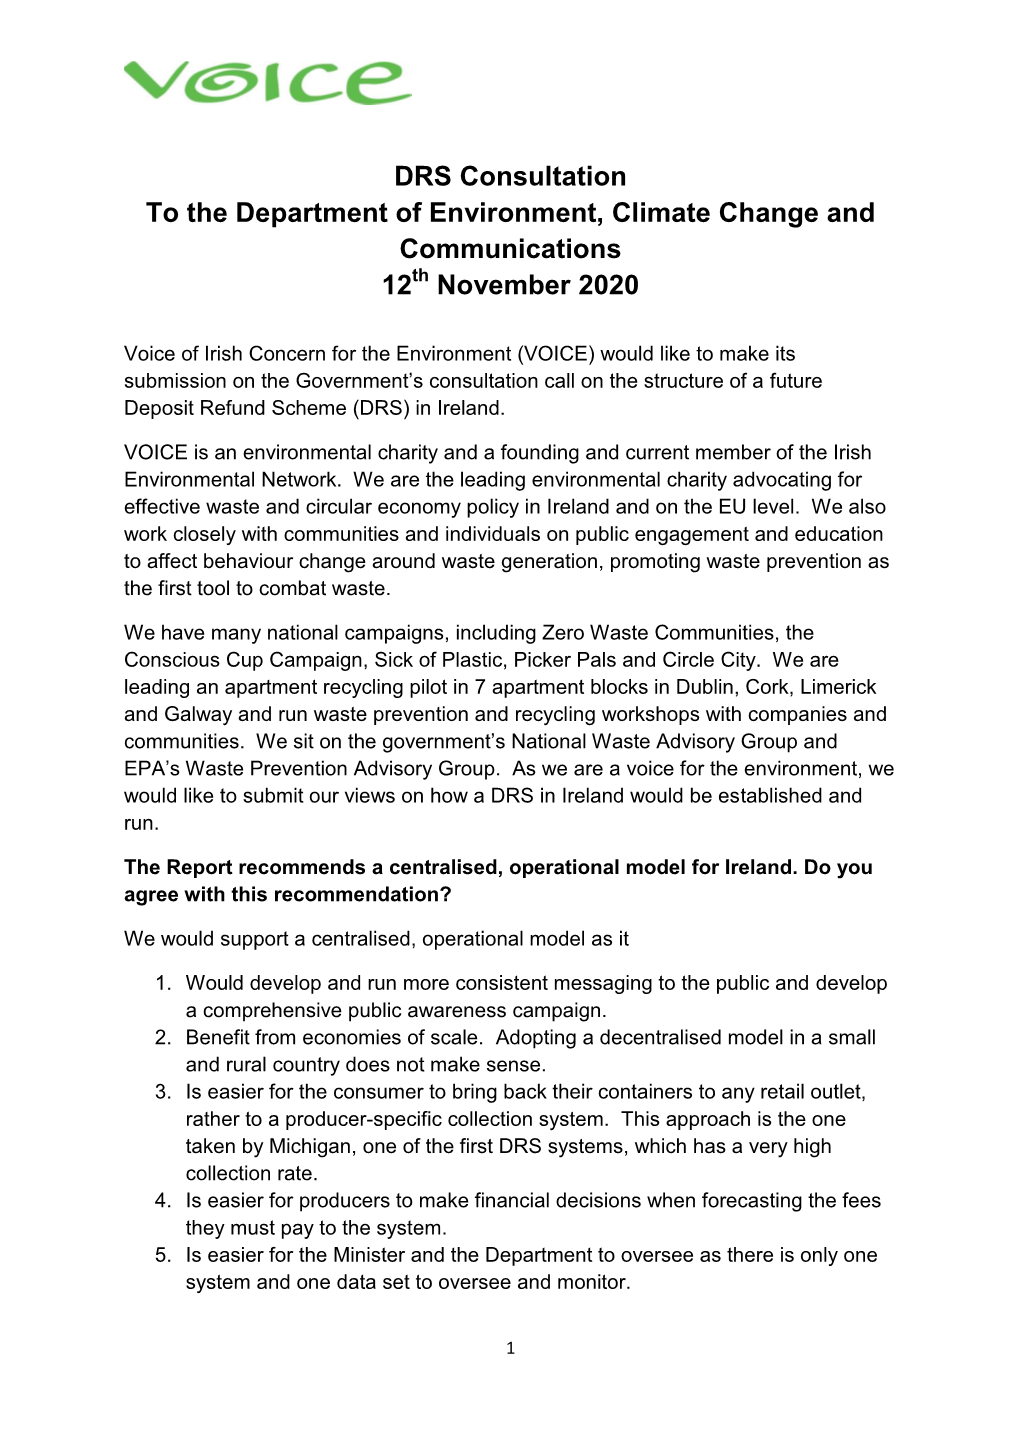 DRS Consultation to the Department of Environment, Climate Change and Communications 12Th November 2020